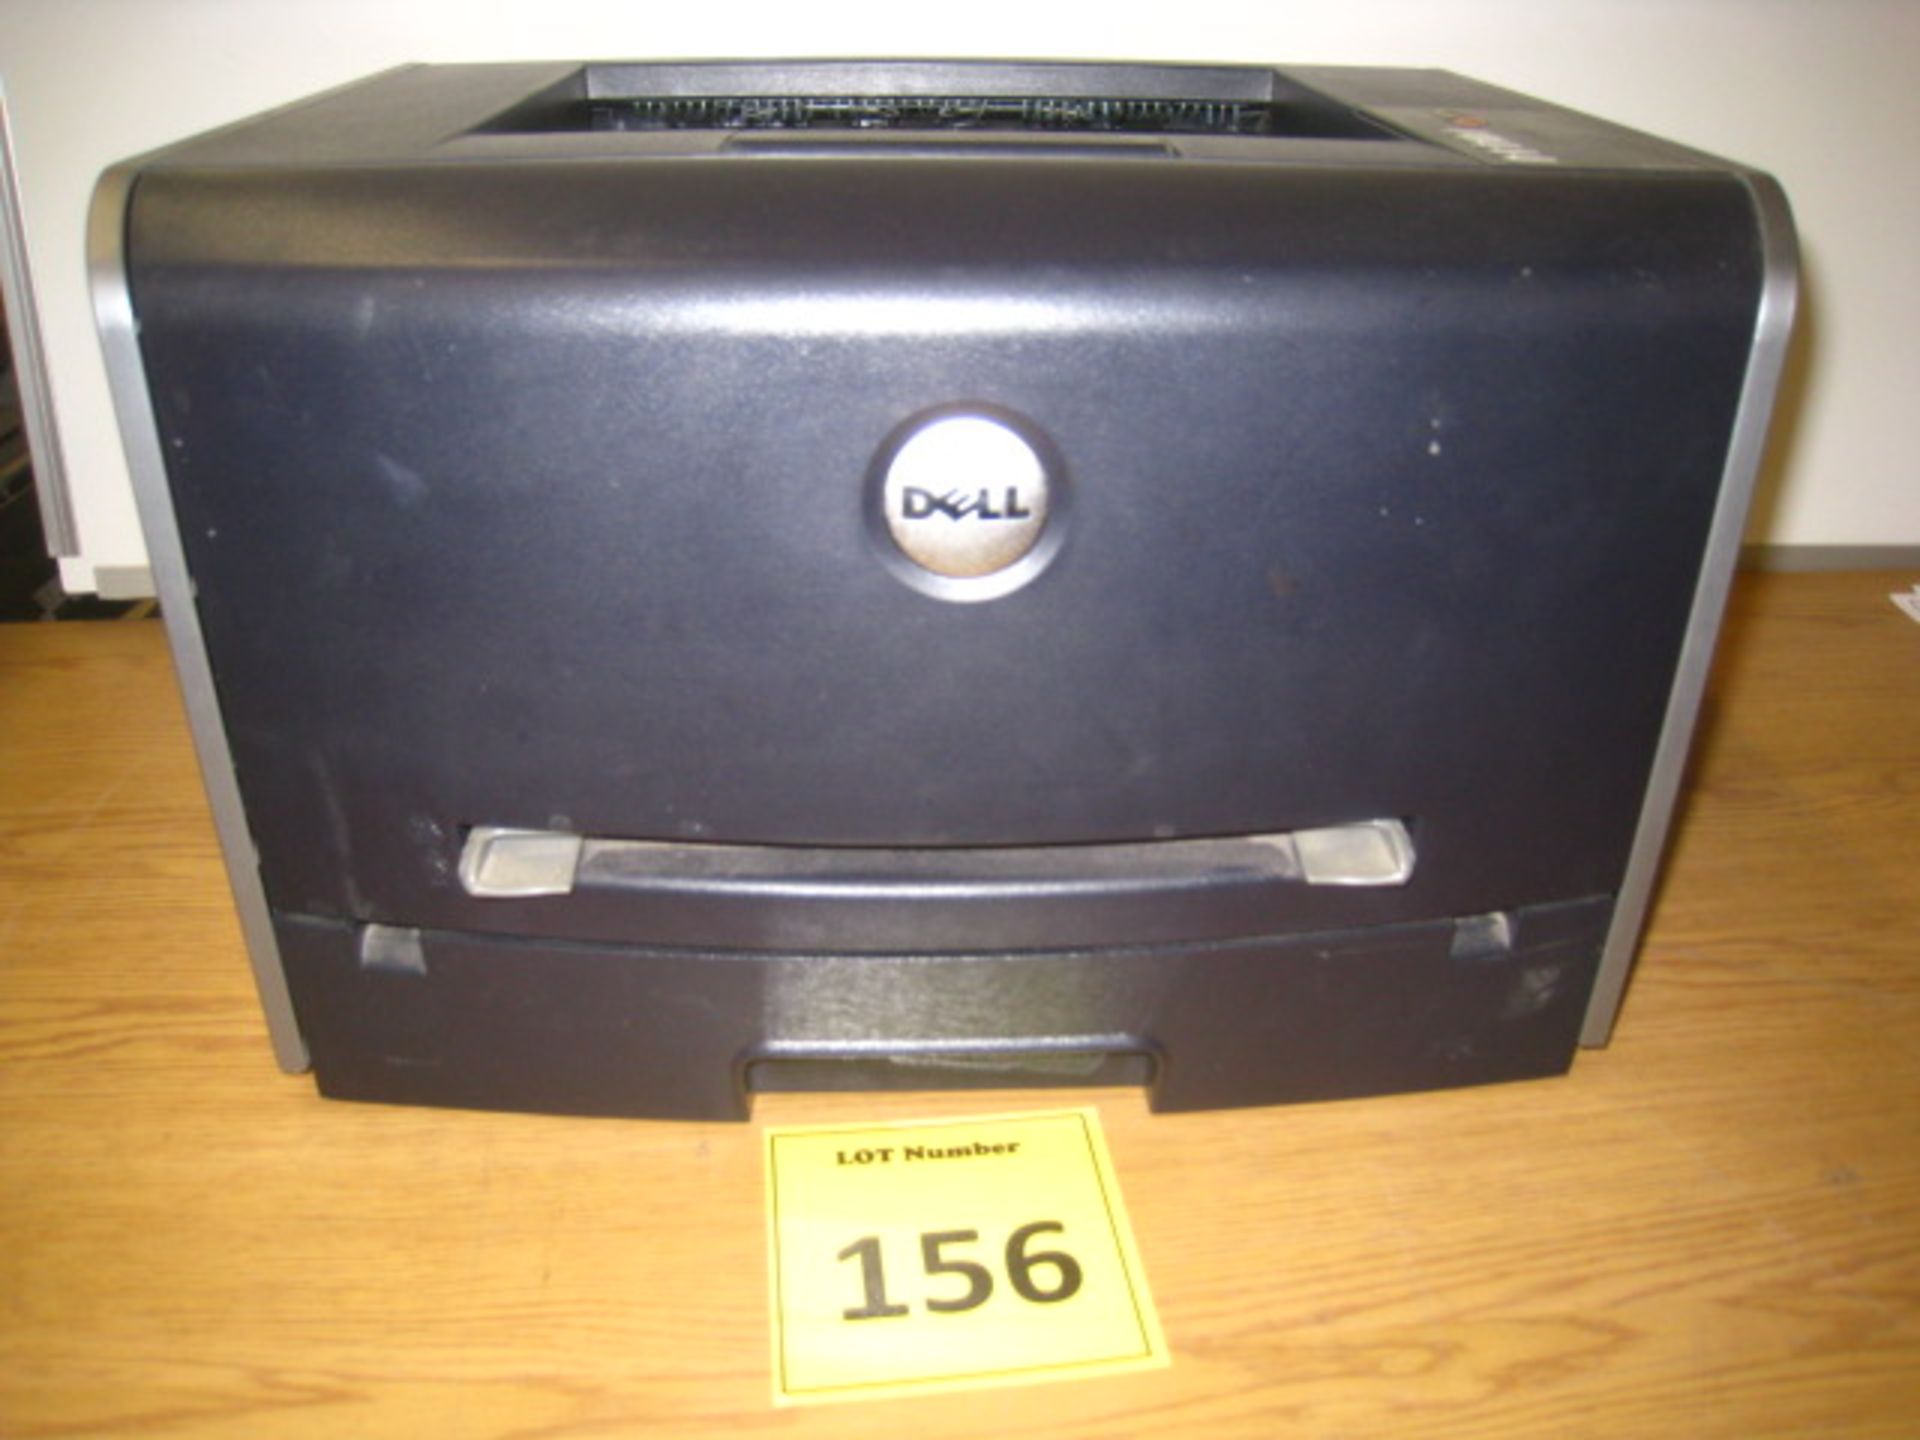 DELL 1710N NETWORK LASER PRINTER WITH USB AND PARALLEL PORTS. WITH TEST PRINT